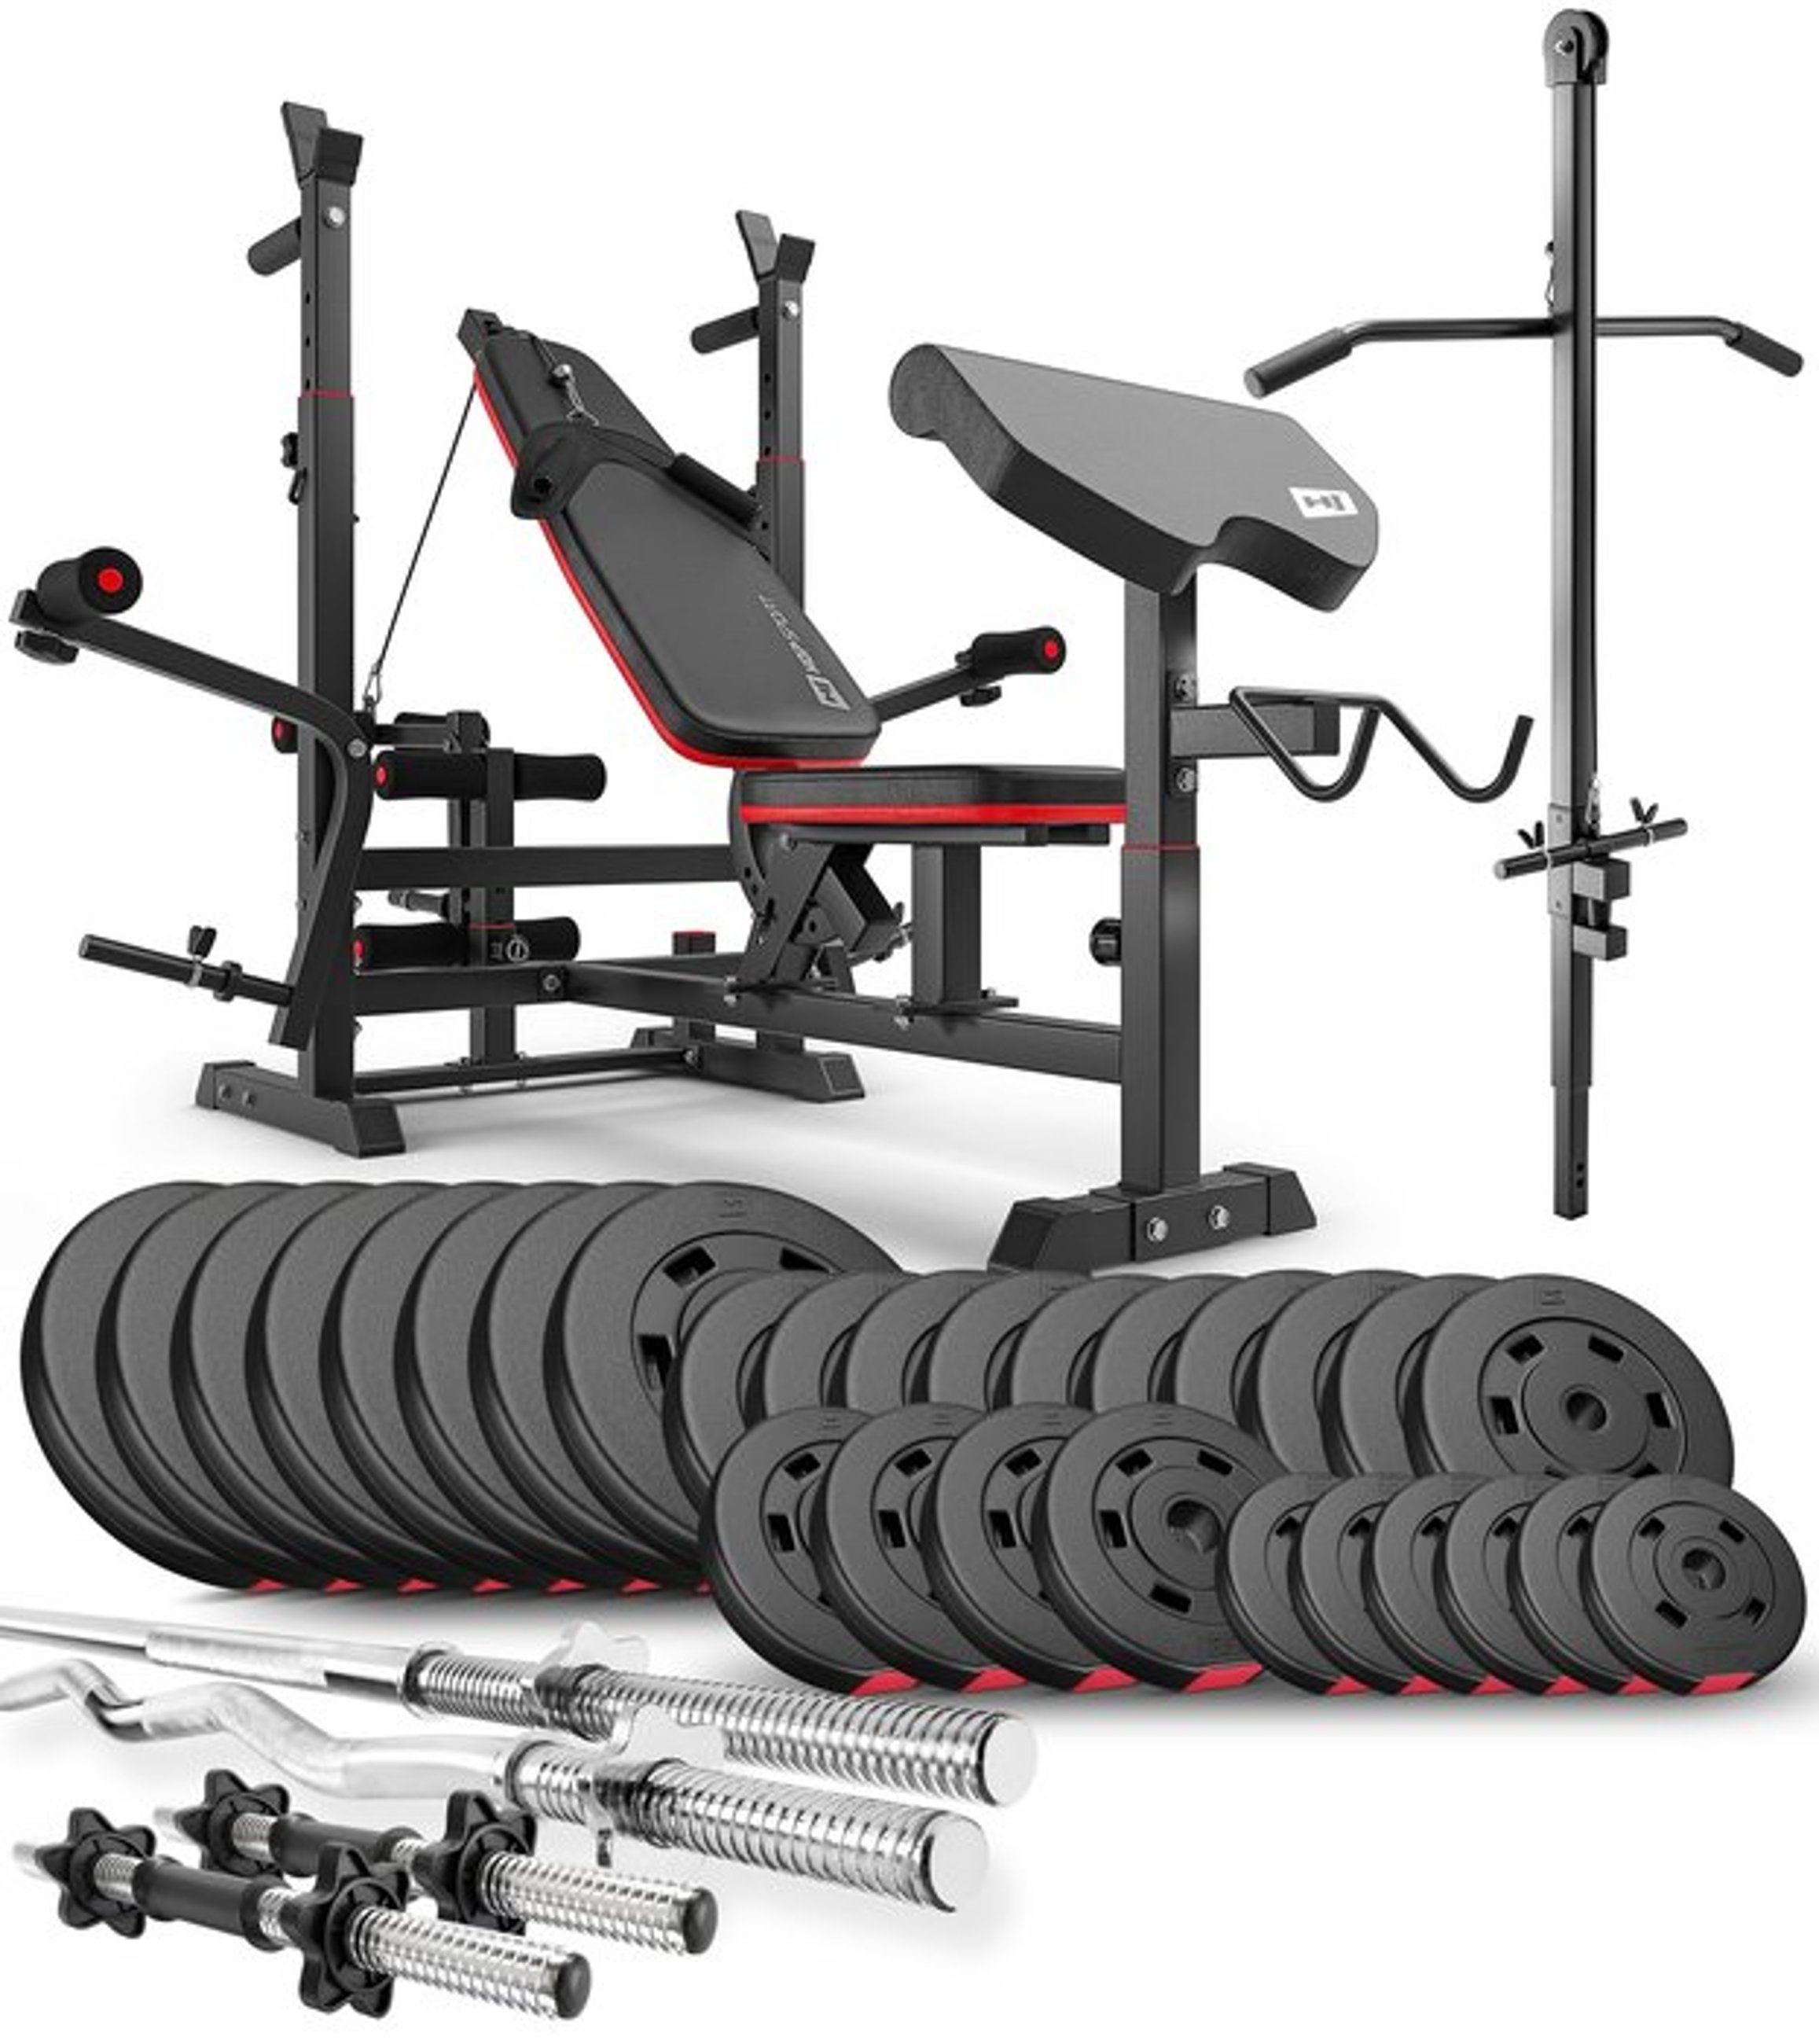 Premium 165 kg Barbell Set with HS-1075 Weight Bench